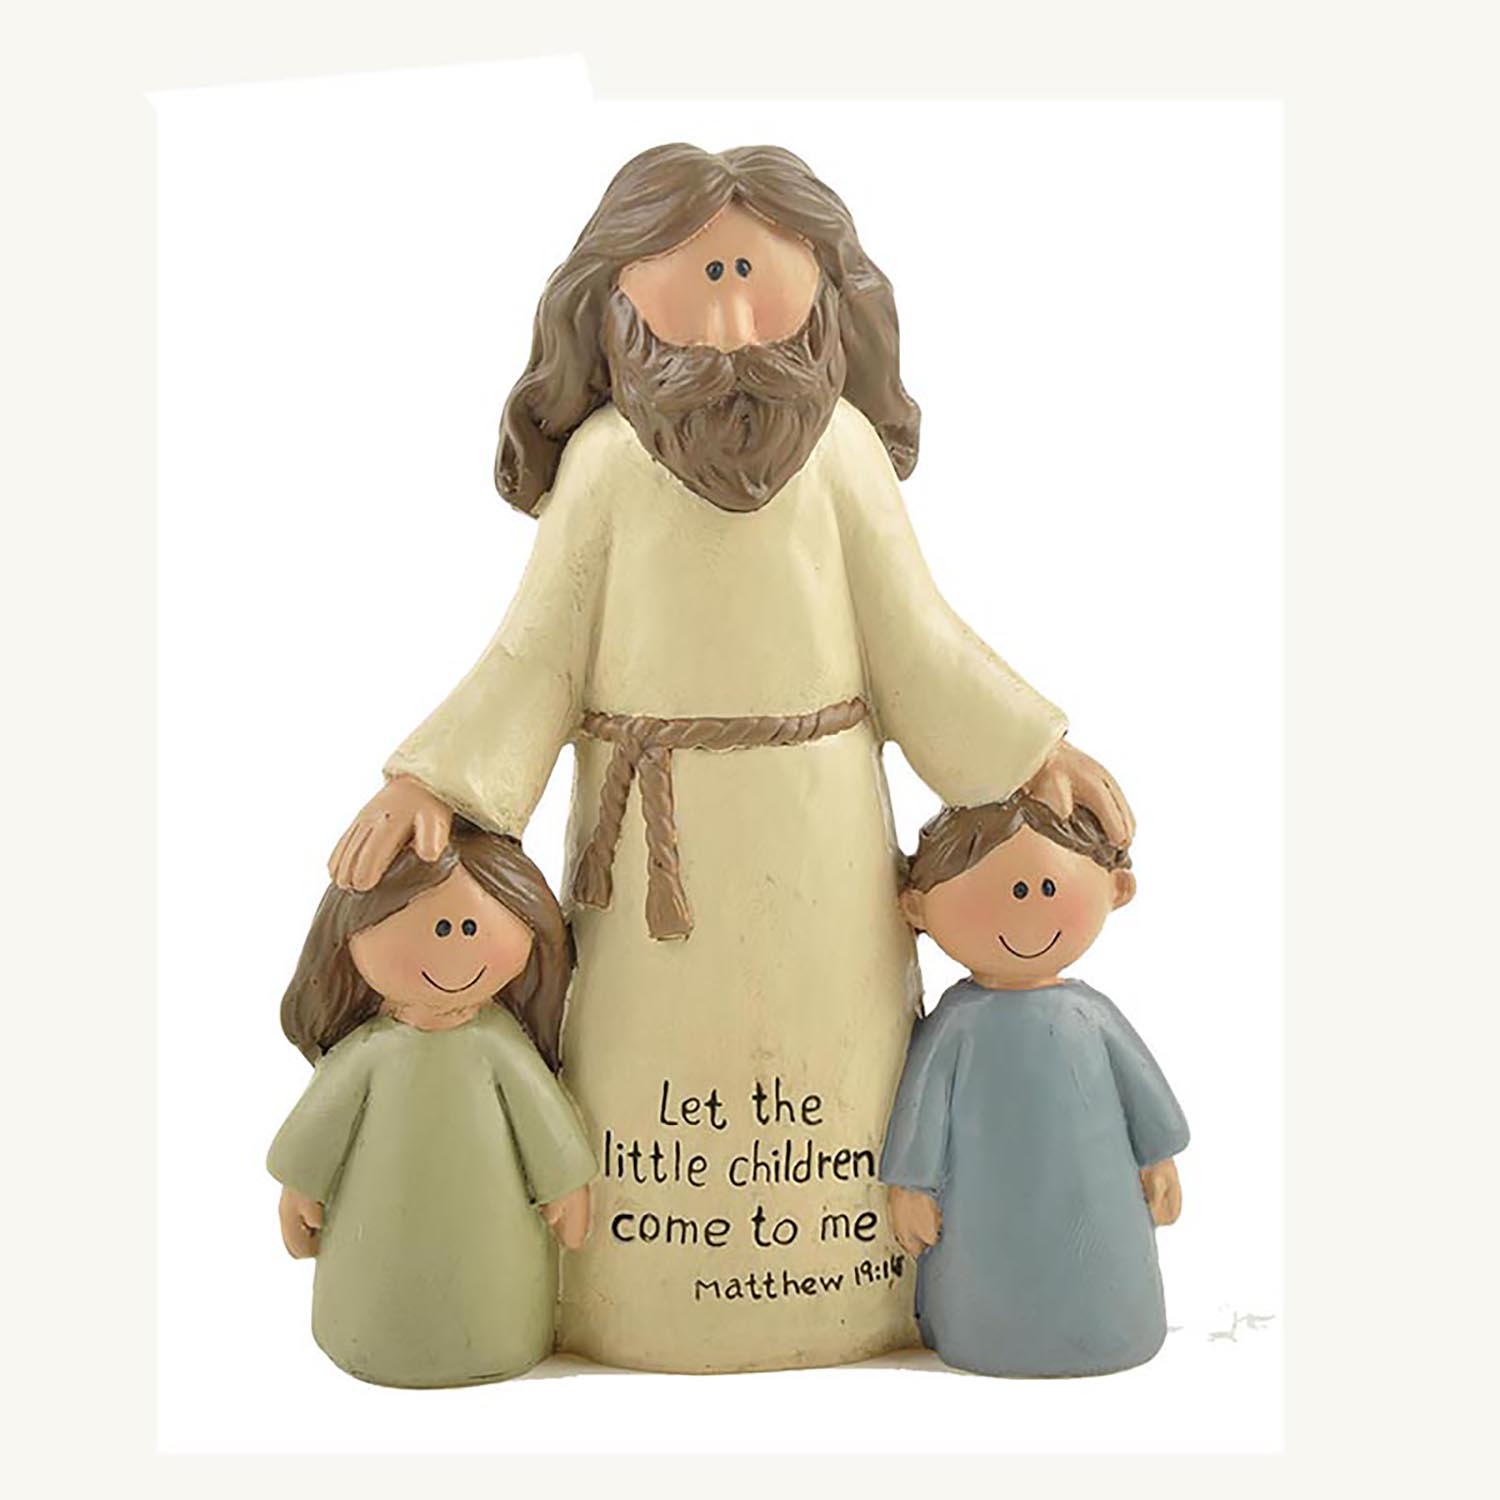 Adorable Jesus and Children Resin Figurine - Spreading Warmth and Love Home Decor with Matthew1211-87511